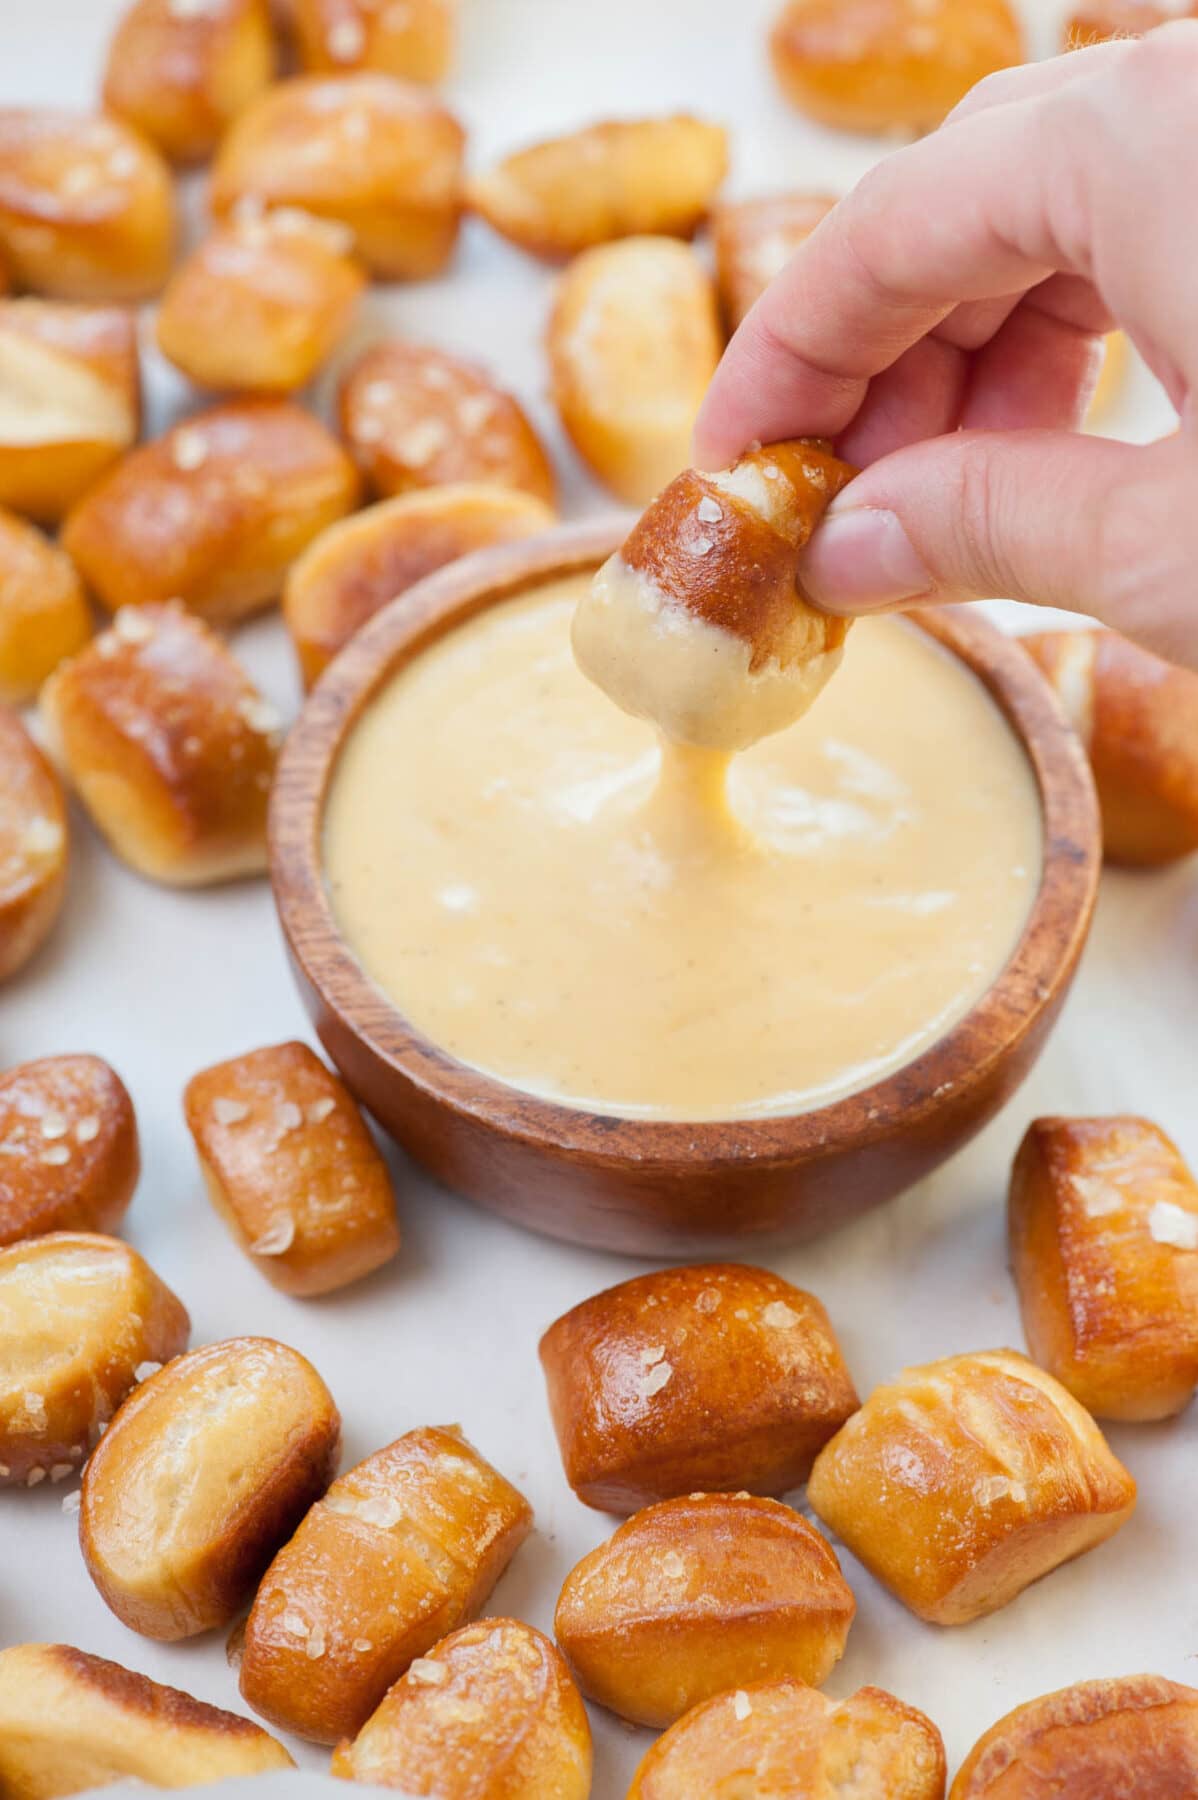 Soft pretzel bites are being dipped in beer cheese dip in a brown bowl.